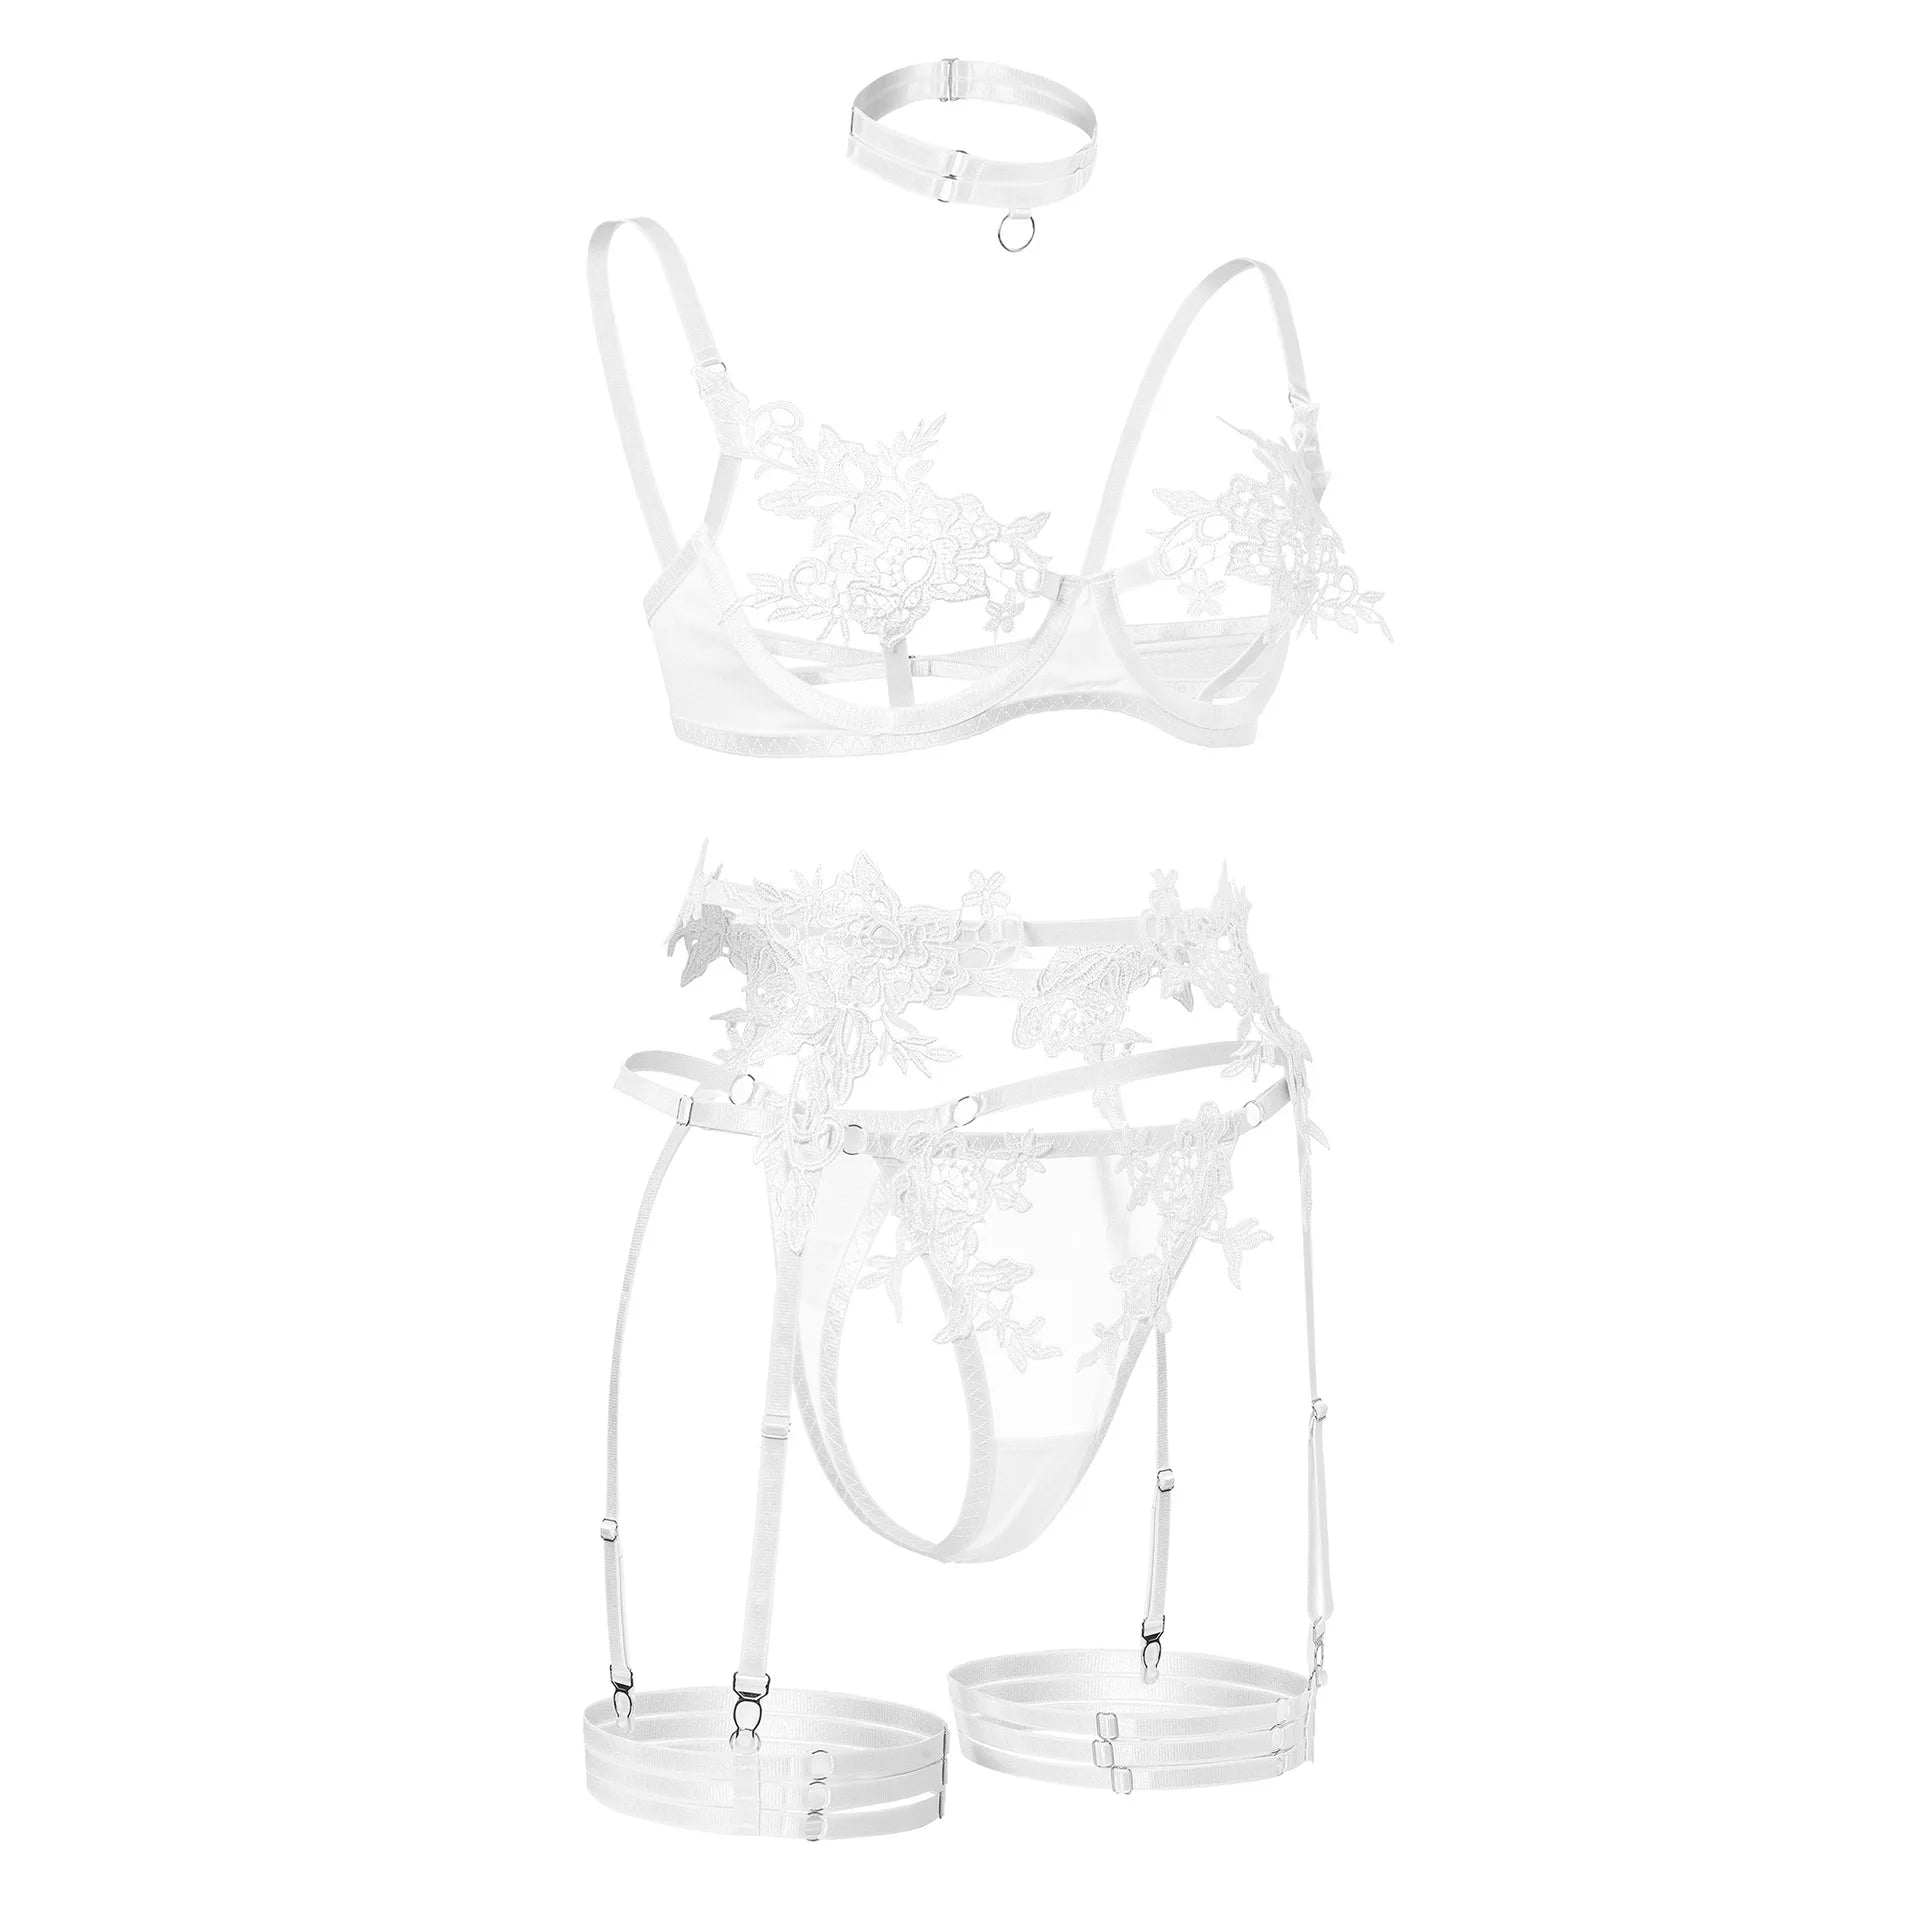 Sensual Lingerie Open Bra See Through Fancy Underwear Uncensored Luxury Lace Porn Exotic Sets Sexy Outfits Intimate - Sellinashop